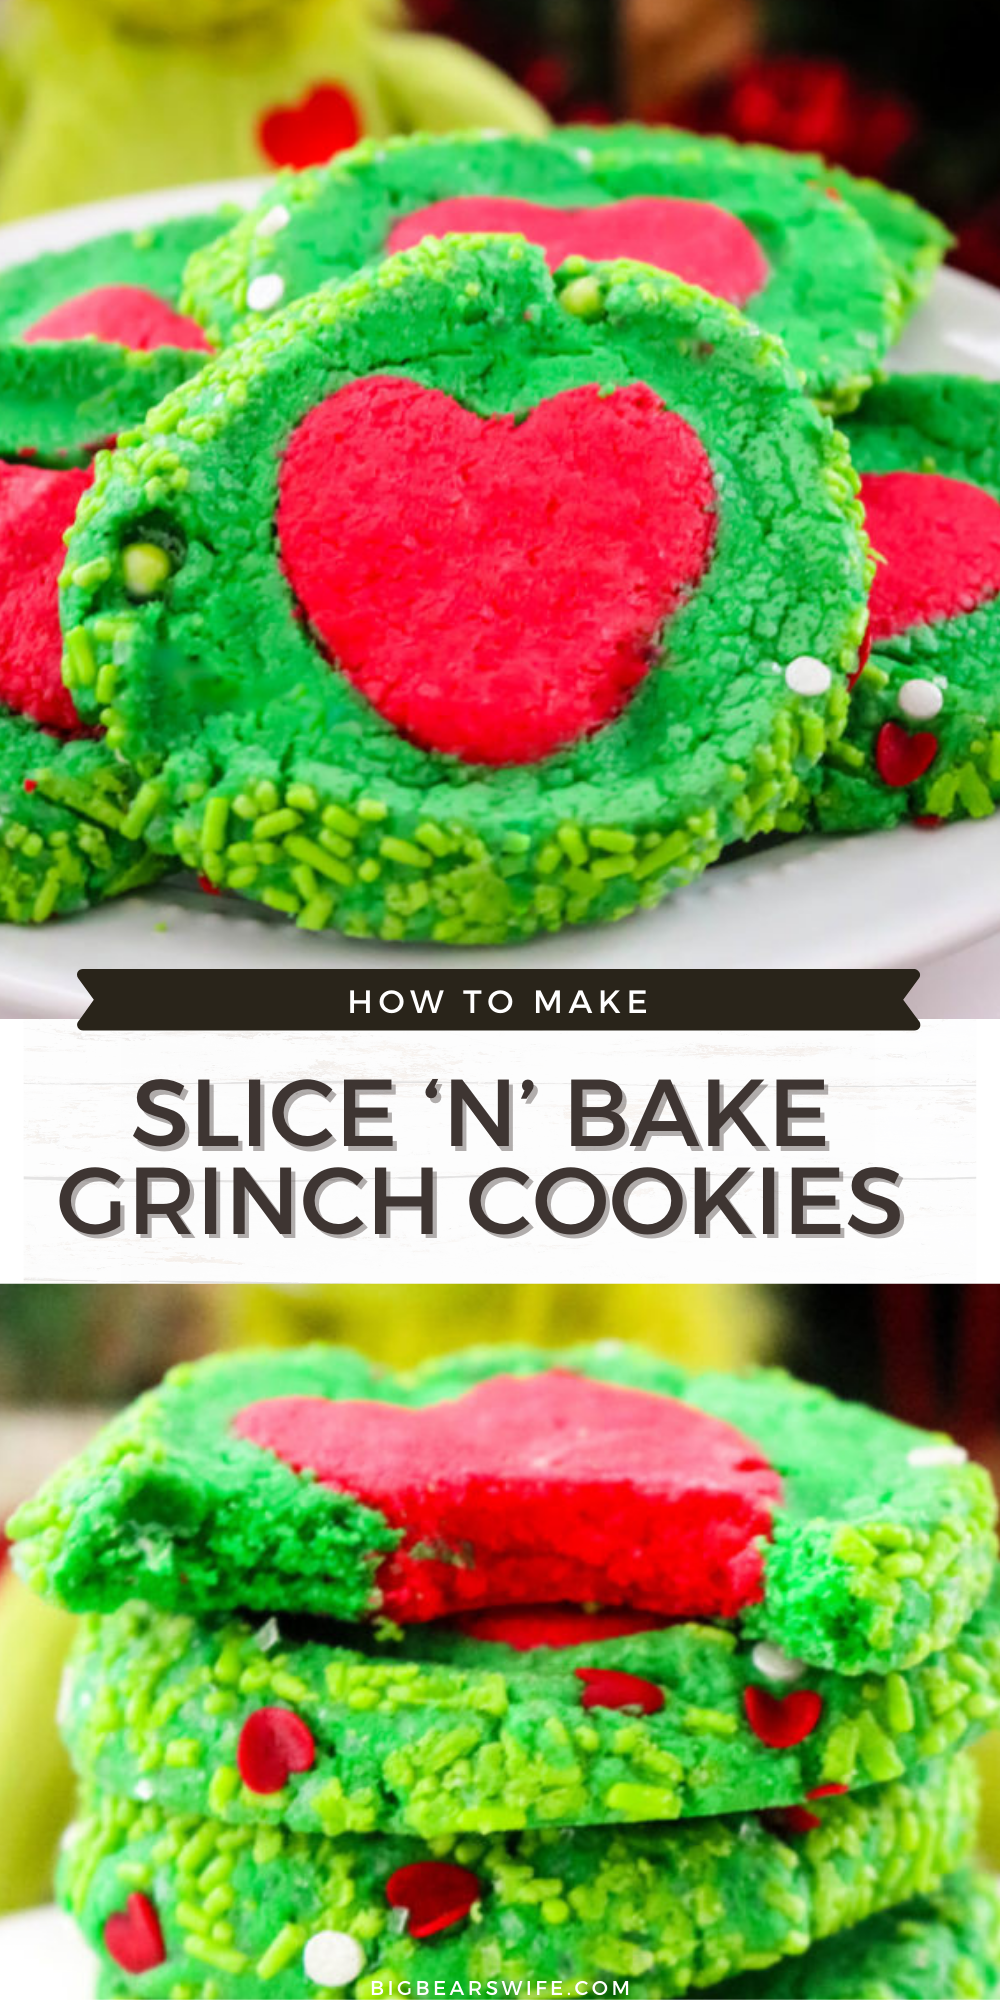 Homemade Slice 'N' Bake Grinch Cookies are perfect for Christmas and might even make a sweet surprise for Santa!  via @bigbearswife